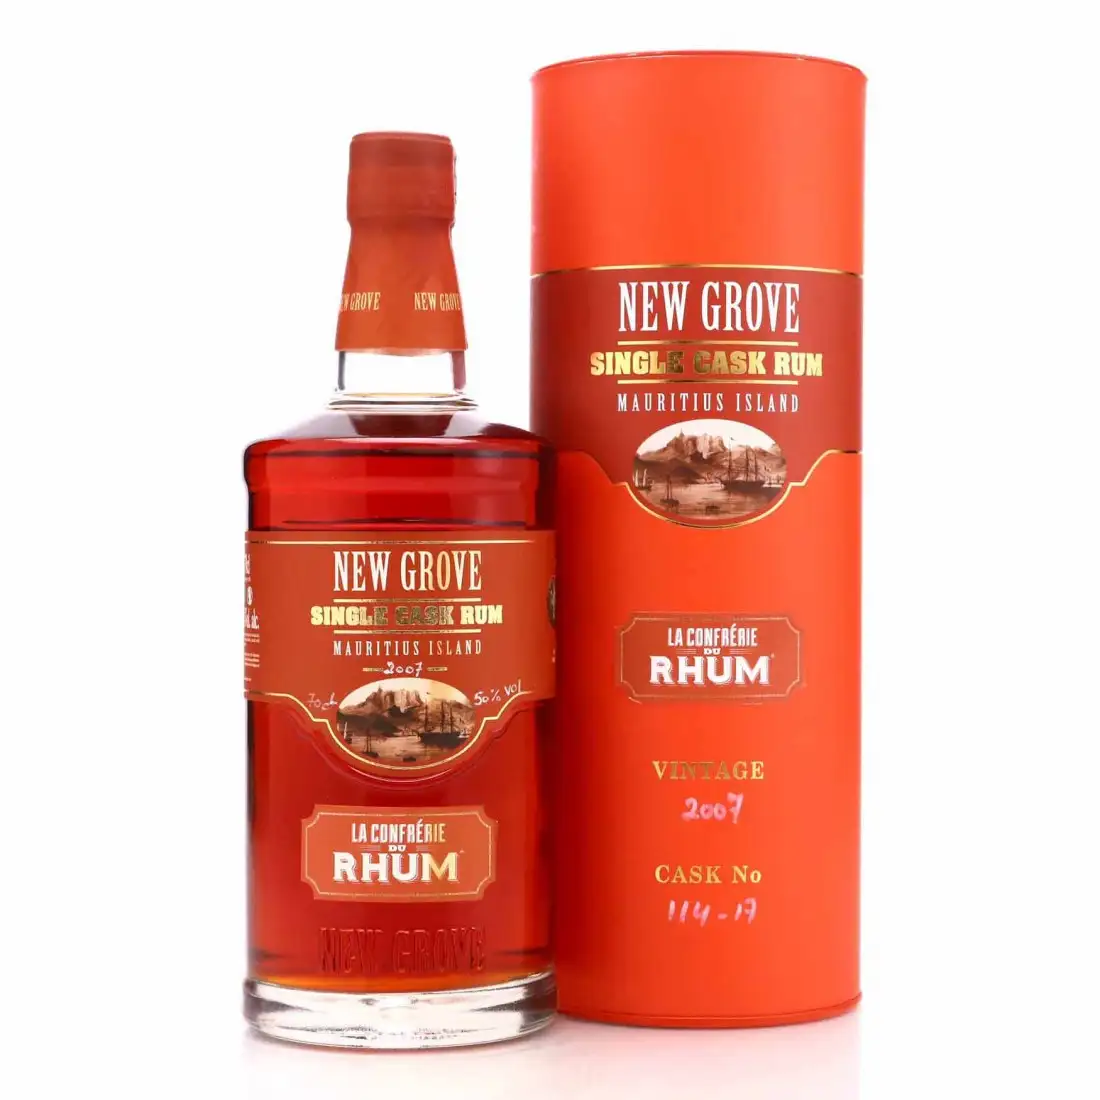 Image of the front of the bottle of the rum New Grove Single Cask